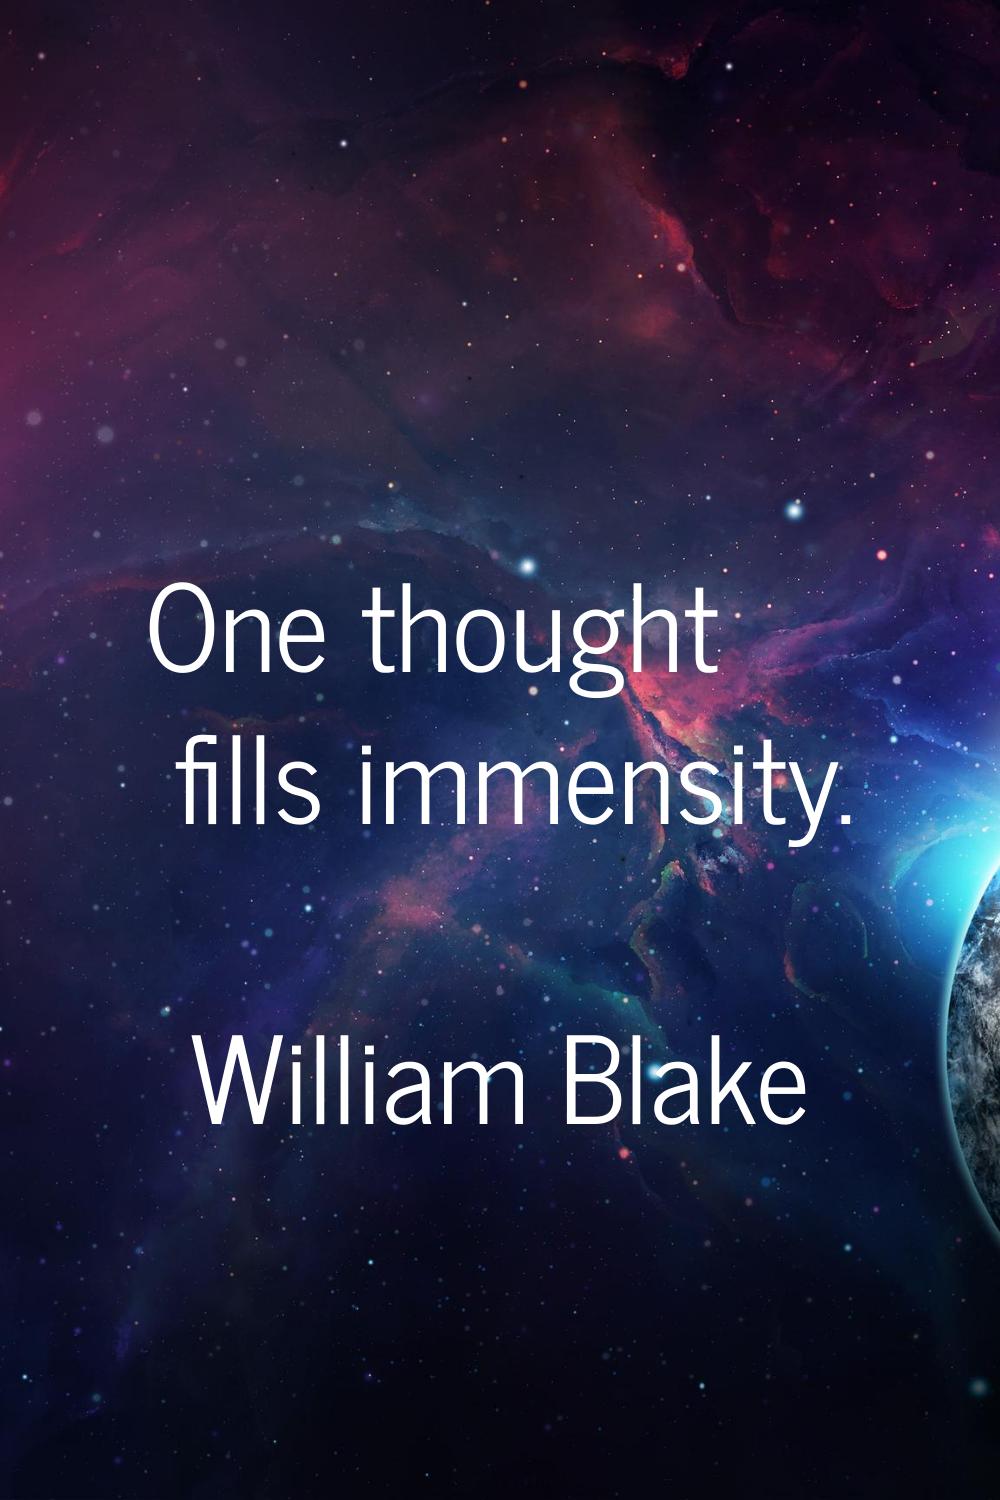 One thought fills immensity.